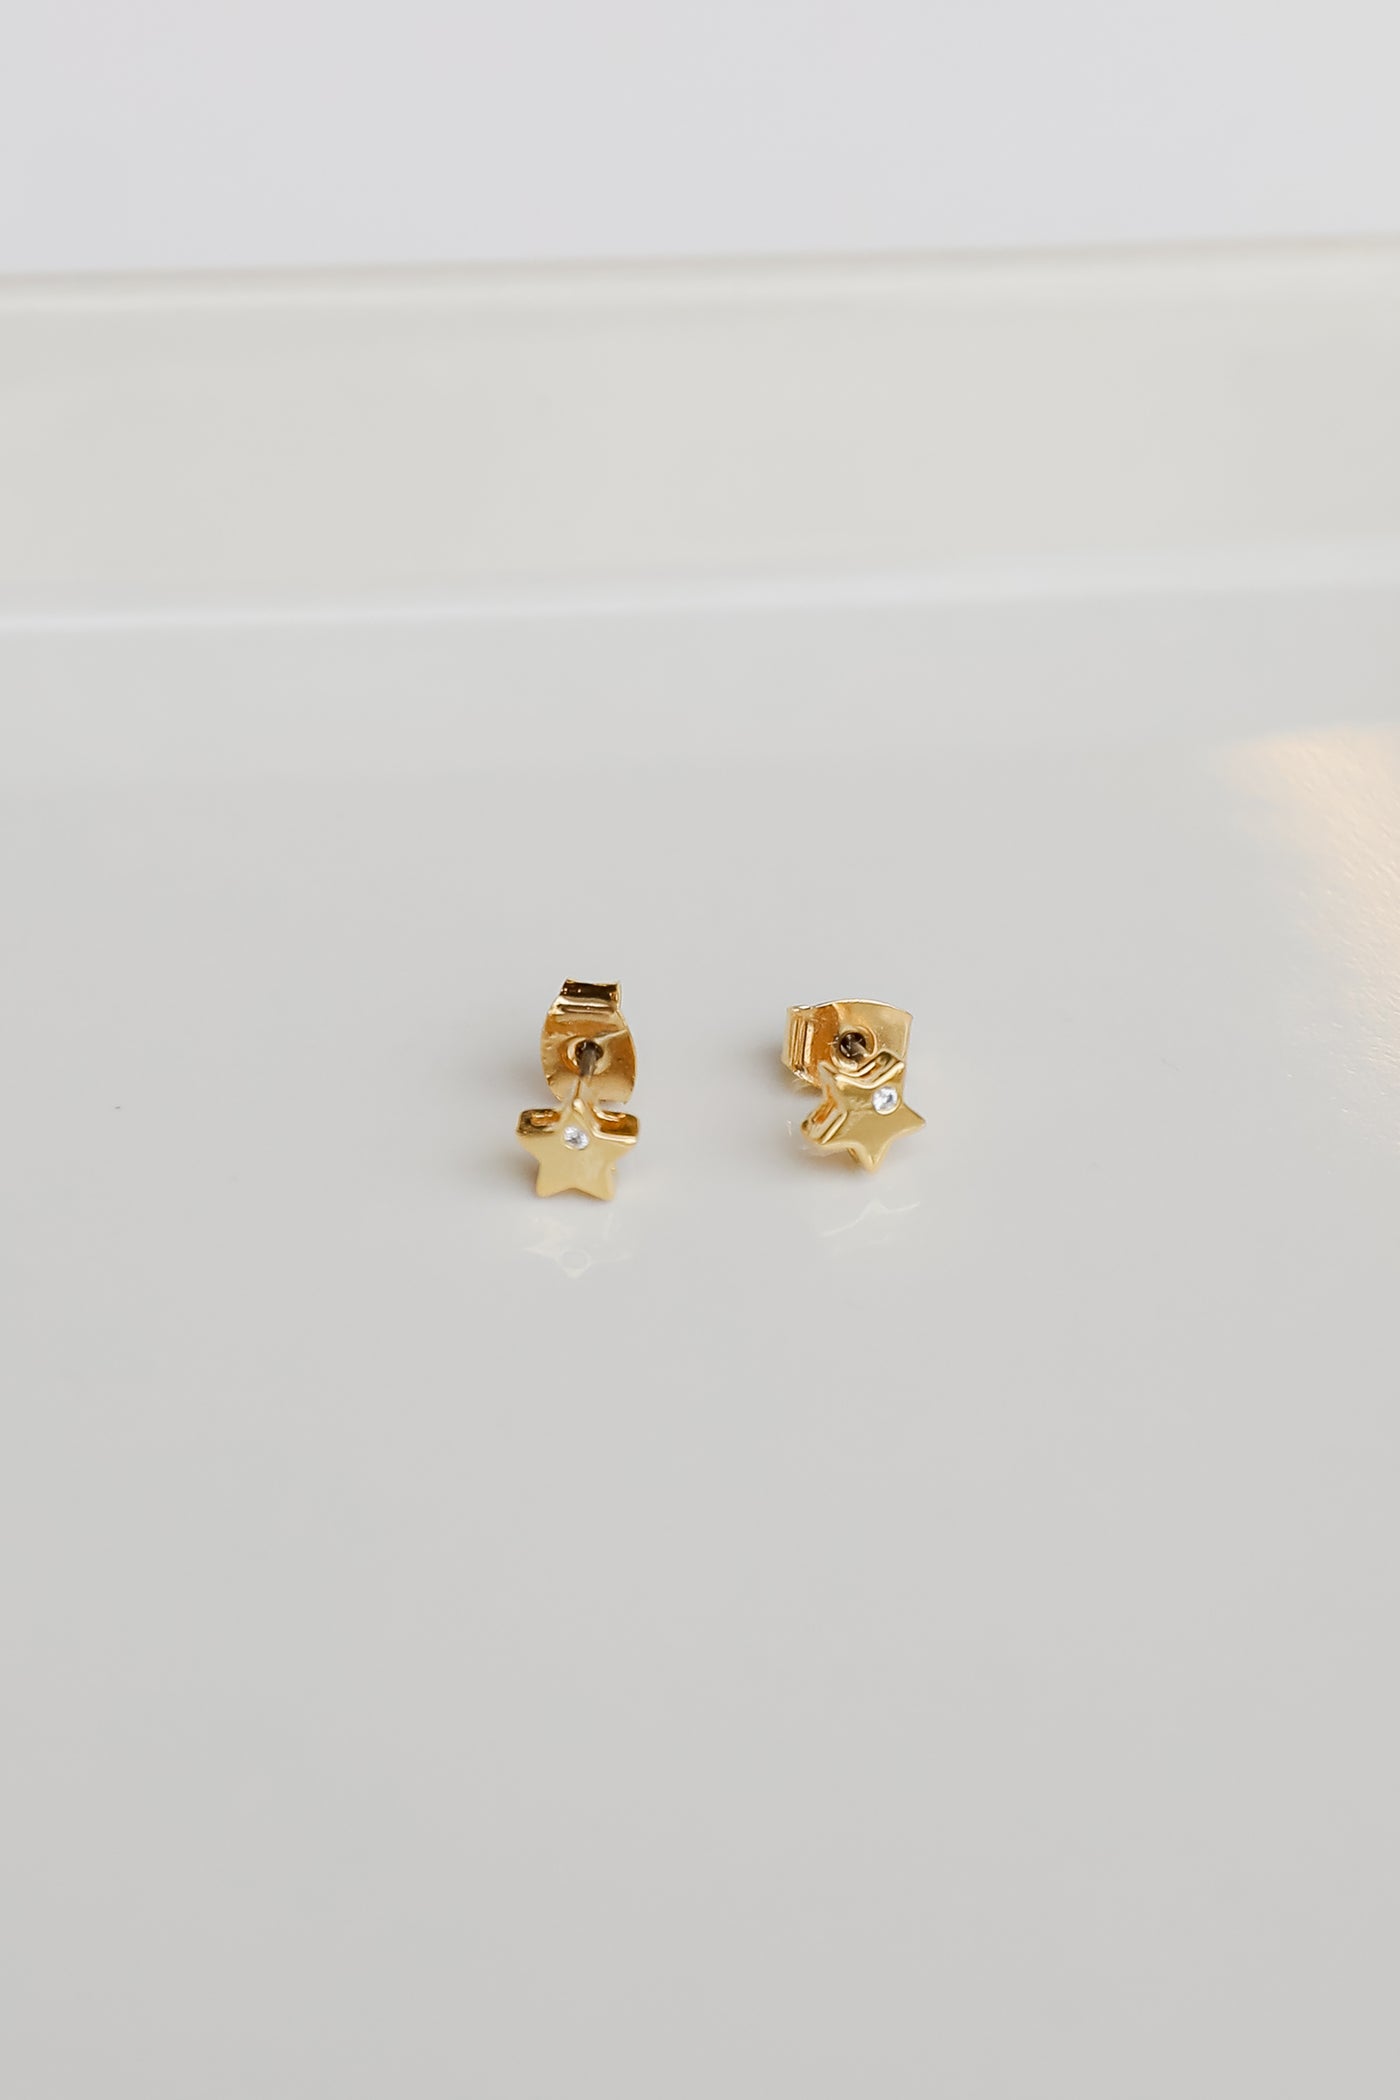 Gold Star Stud Earrings from dress up